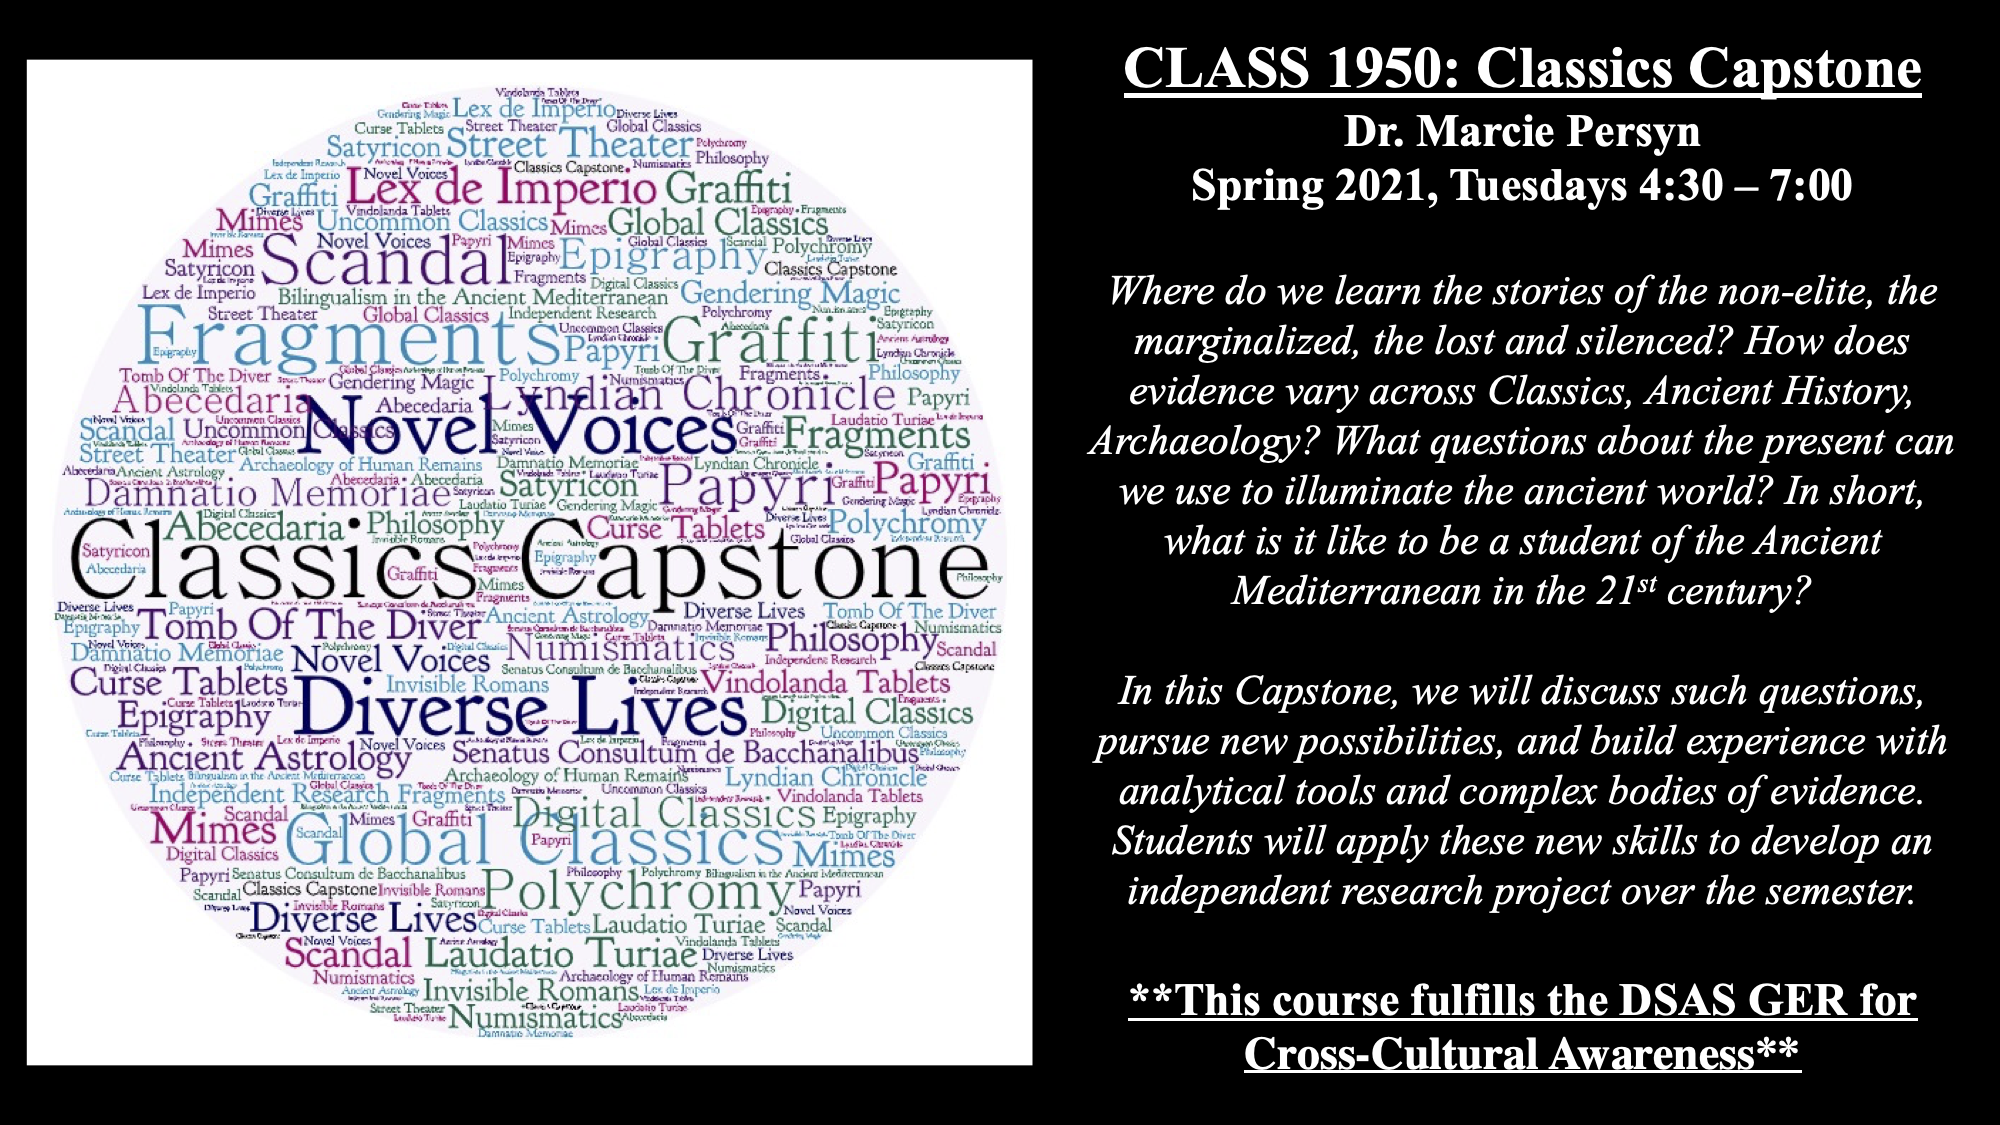 CLASS 1950: Classics Capstone Dr. Marcie Persyn Spring 2021, Tuesdays 4:30 – 7:00 Where do we learn the stories of the non-elite, the marginalized, the lost and silenced? How does evidence vary across Classics, Ancient History, Archaeology? What questions about the present can we use to illuminate the ancient world? In short, what is it like to be a student of the Ancient Mediterranean in the 21st century? In this Capstone, we will discuss such questions, pursue new possibilities, and build experience with analytical tools and complex bodies of evidence. Students will apply these new skills to develop an independent research project over the semester. **This course fulfills the DSAS GER for Cross-Cultural Awareness** This is a black flyer with a white image that has multicolor words related to the Capstone topic.